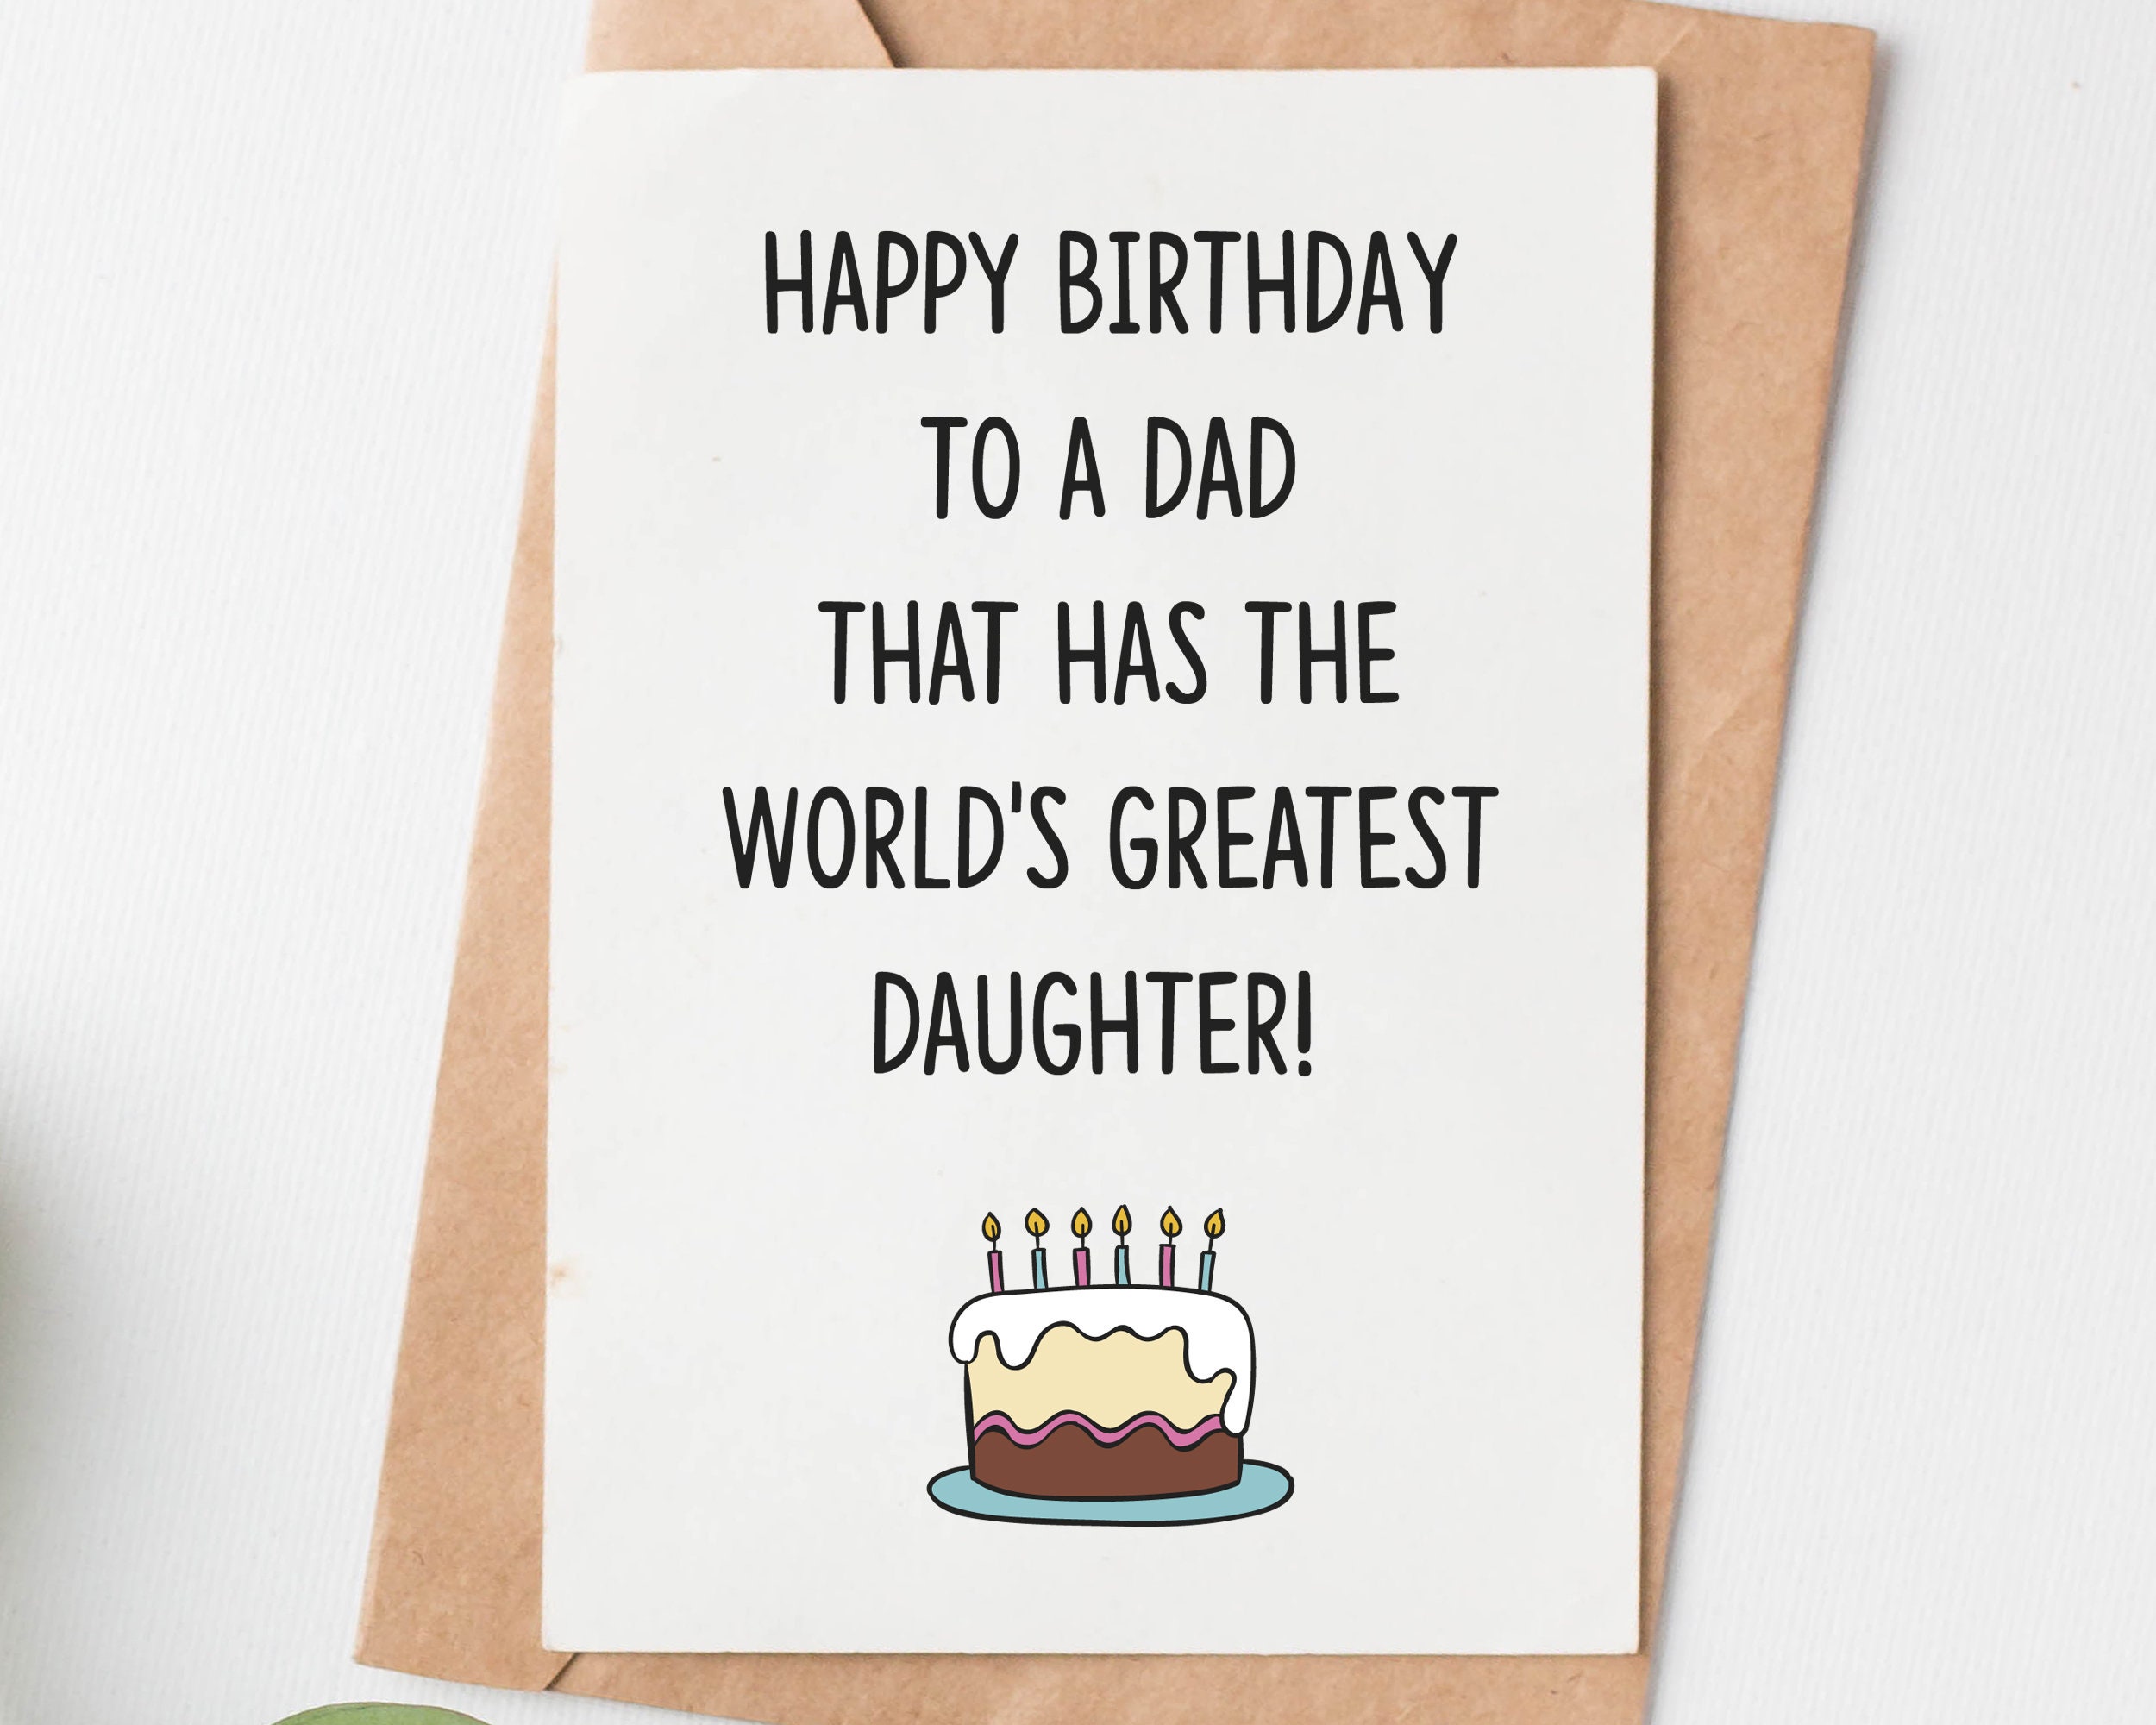 how-to-make-a-birthday-card-for-dad-birthday-cards-for-dad-from-funny